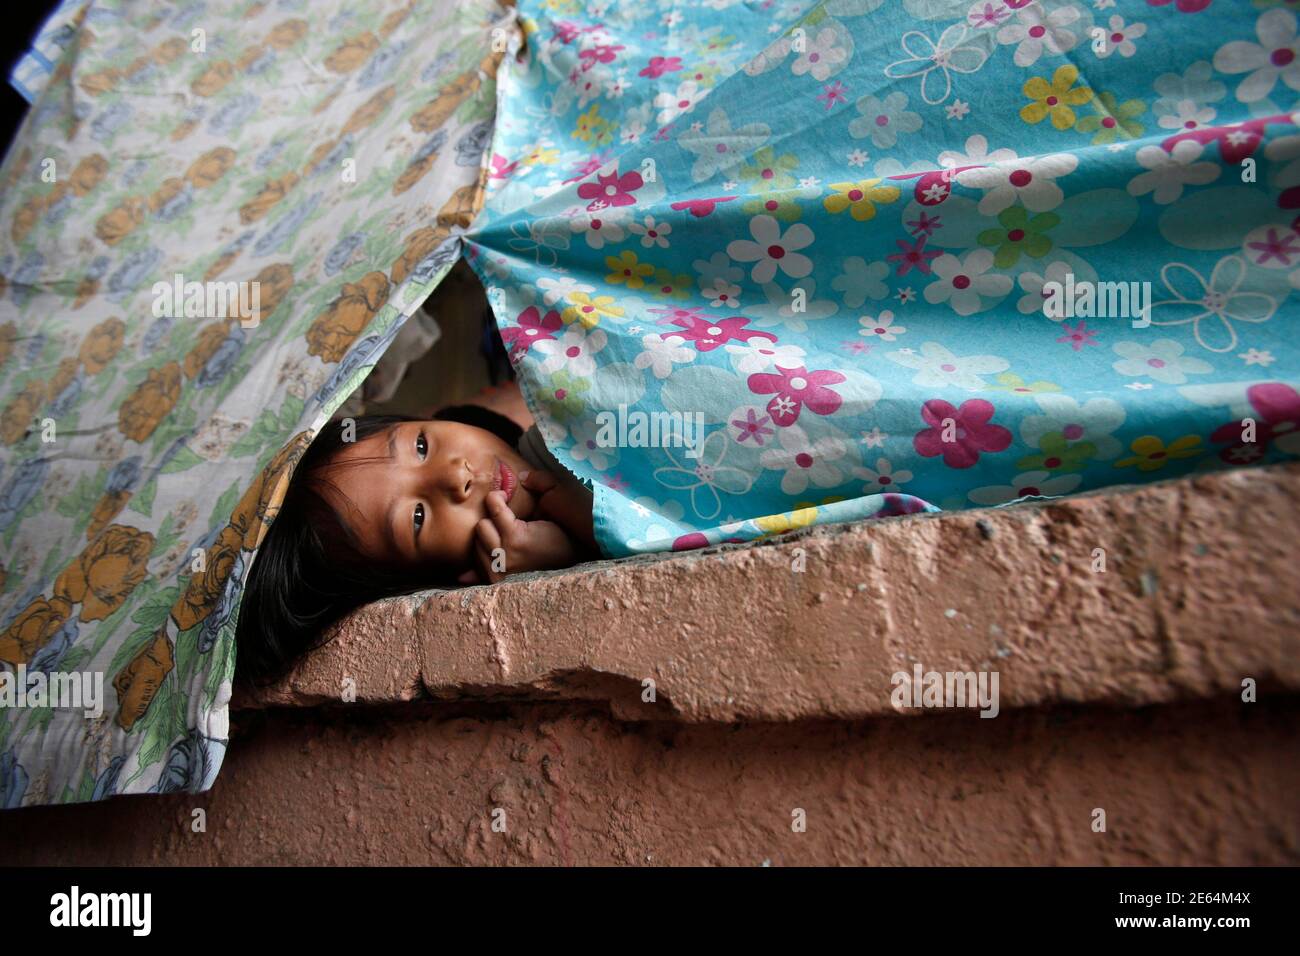 A girl looks out from a makeshift tent at an evacuation centre for flood victims in Calumpit, Bulacan, north of Manila, August 22, 2013. The southwest monsoon that wreaked havoc on Metro Manila and nearby areas earlier this week is likely to weaken now that Typhoon Trami made landfall over China, state weather forecasters said Thursday. The death toll from the heavy monsoon rain and floods since last weekend rose to at least 16 as of Thursday morning, the National Disaster Risk Reduction and Management Council said. REUTERS/Erik De Castro (PHILIPPINES - Tags: DISASTER ENVIRONMENT) Stock Photo